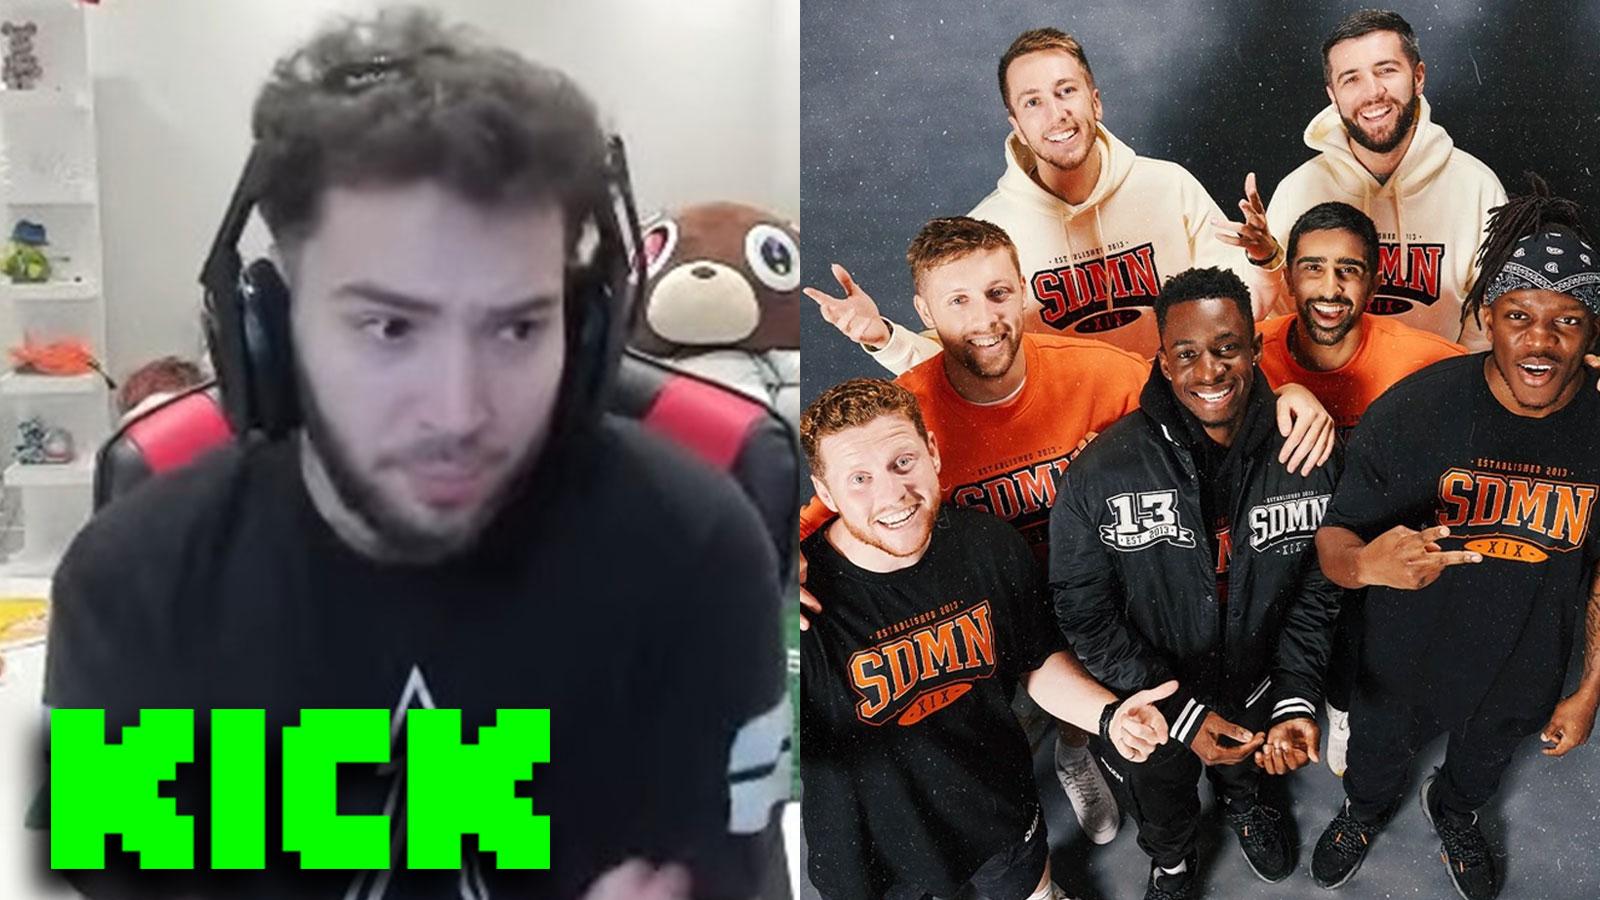 Kick star Adin Ross next to a picture of YouTube group Sidemen.